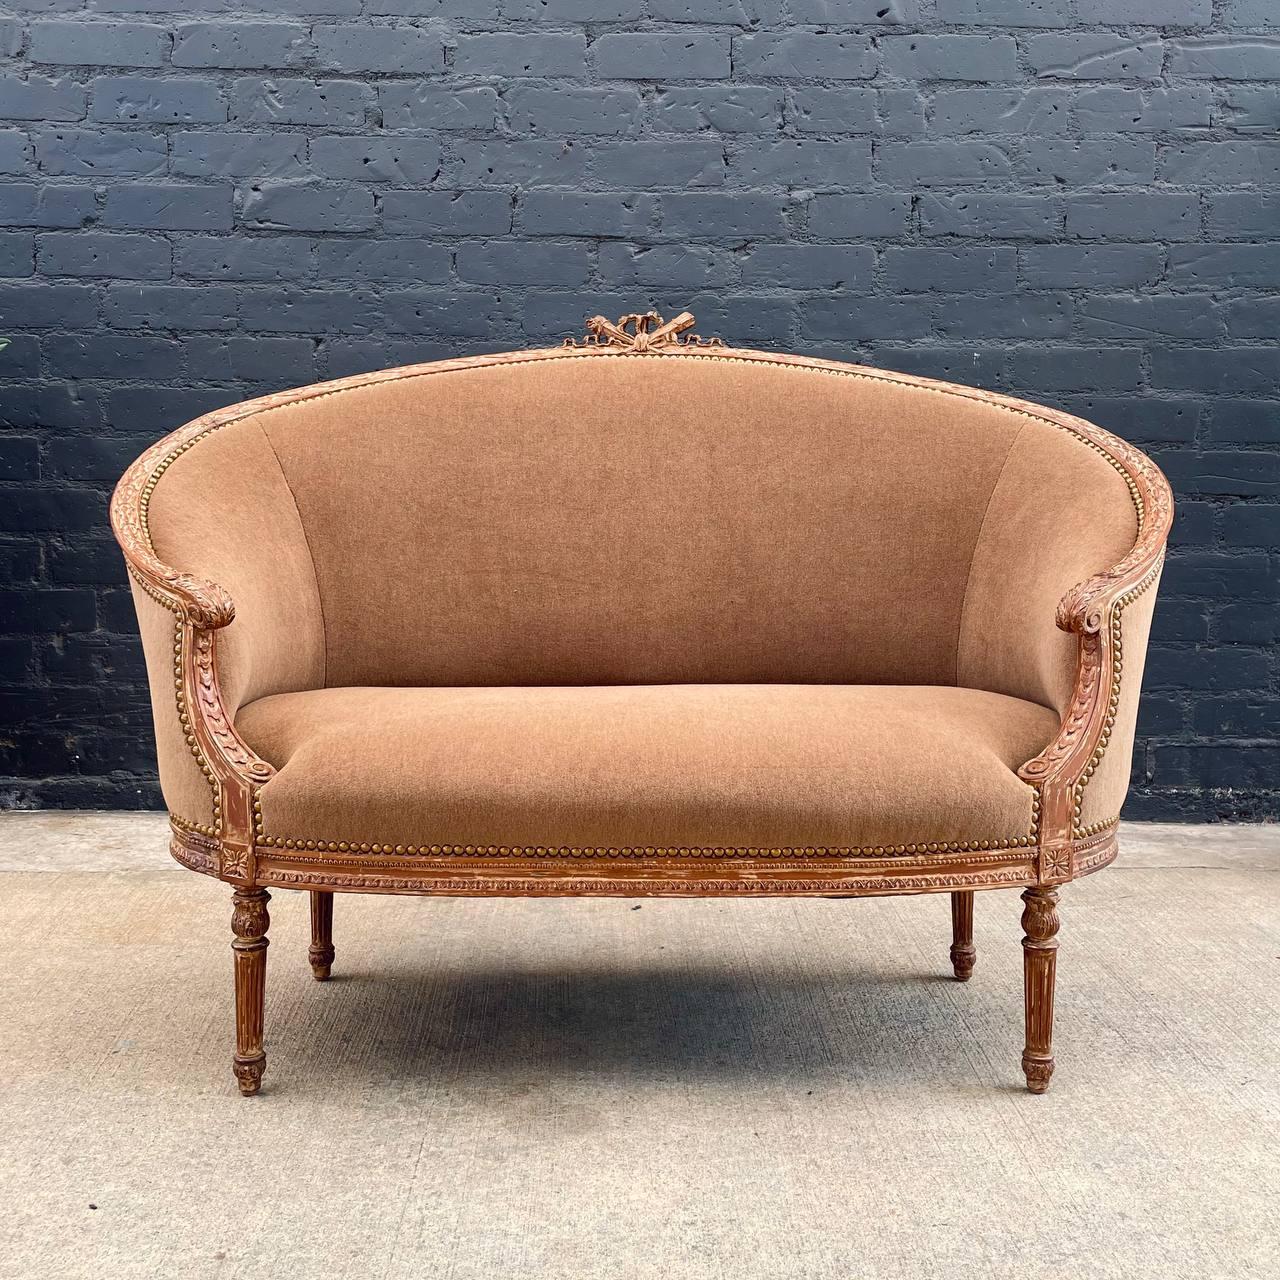 Early 20th Century Antique French Louis XVI Alpaca Mohair Love Seat Sofa with Carved Details For Sale